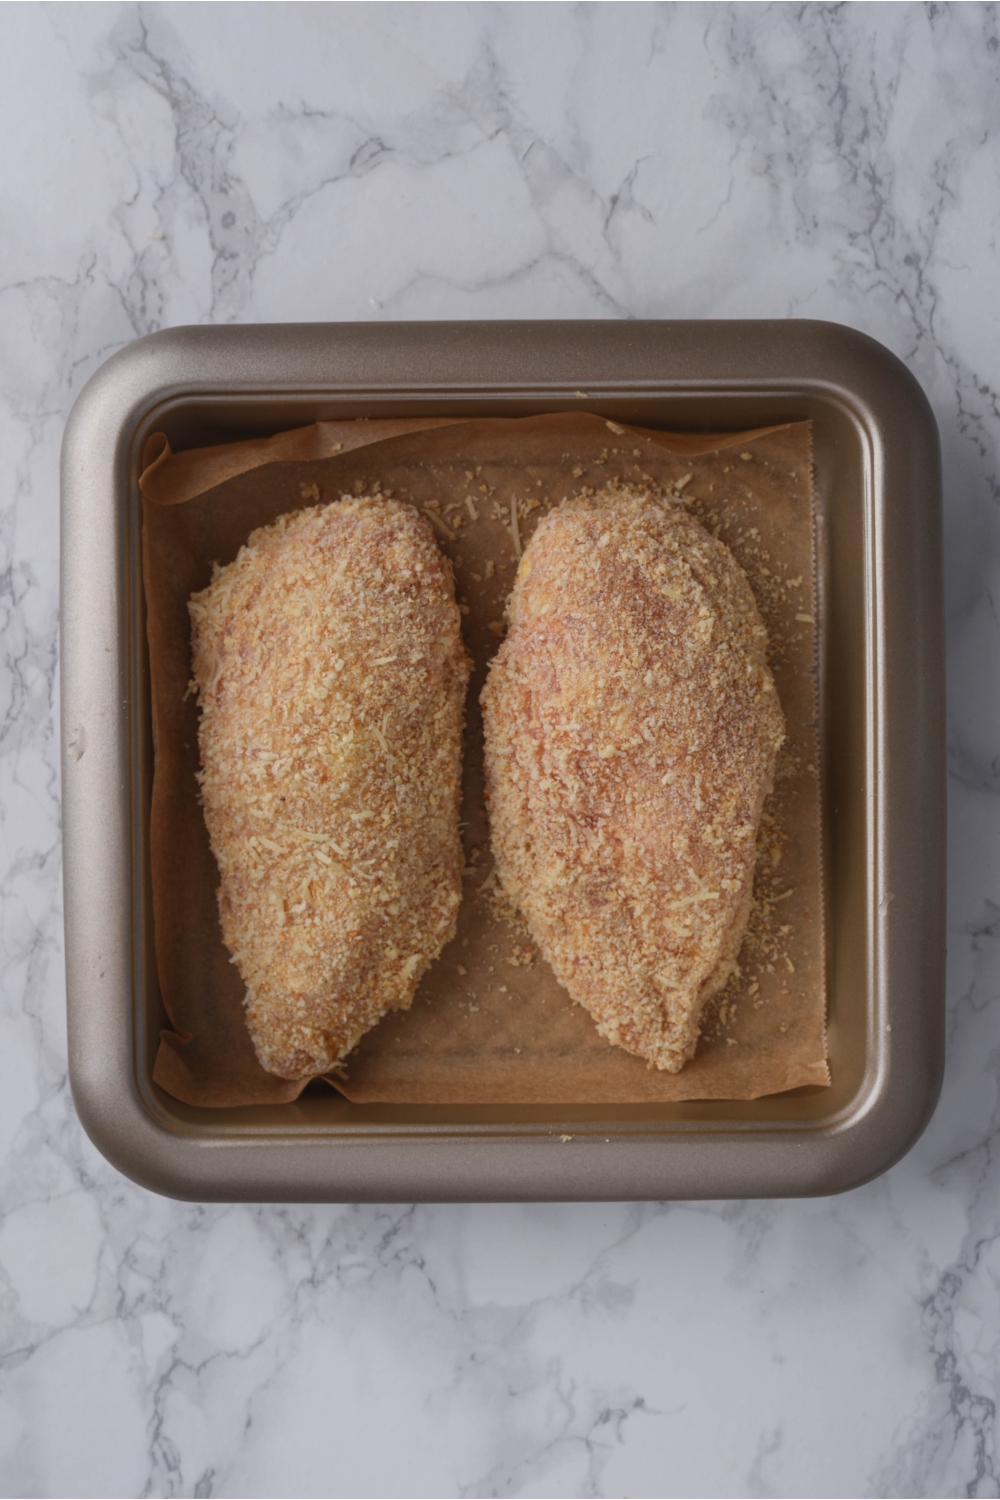 Two raw, breaded chicken breasts in a baking pan lined with parchment paper.